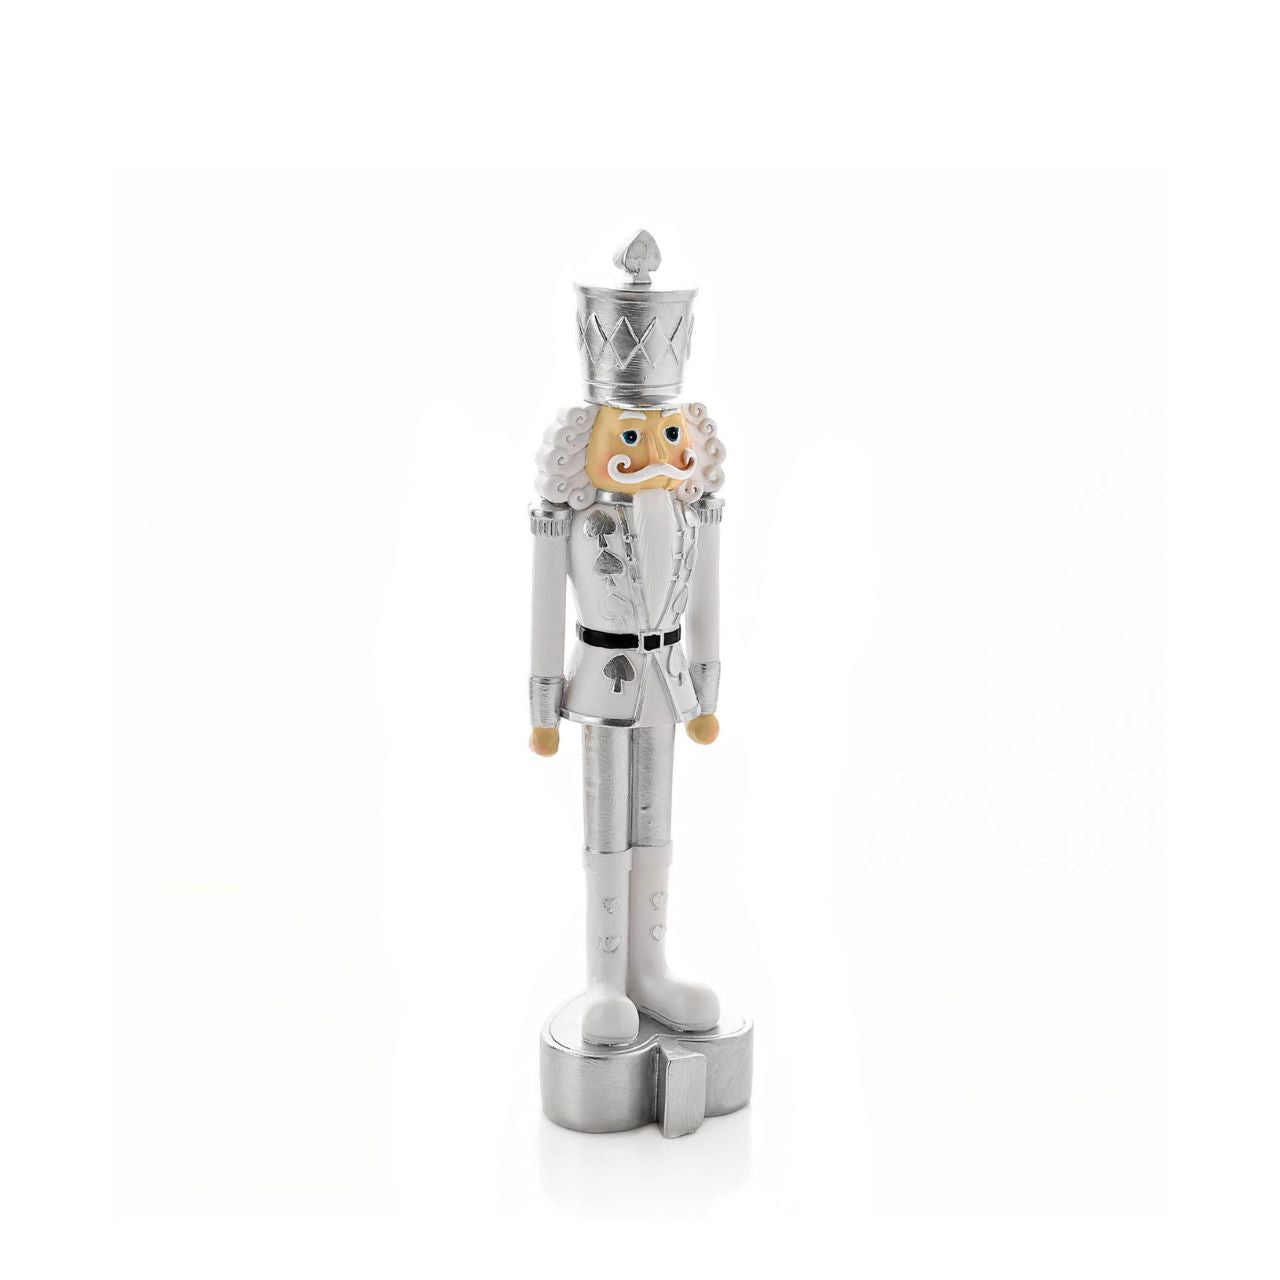 Christmas Nutcracker Figurine Silver 24 cm  This fun and festive nutcracker figurine is a stylish way to welcome a traditional festive character into your home this holiday season.